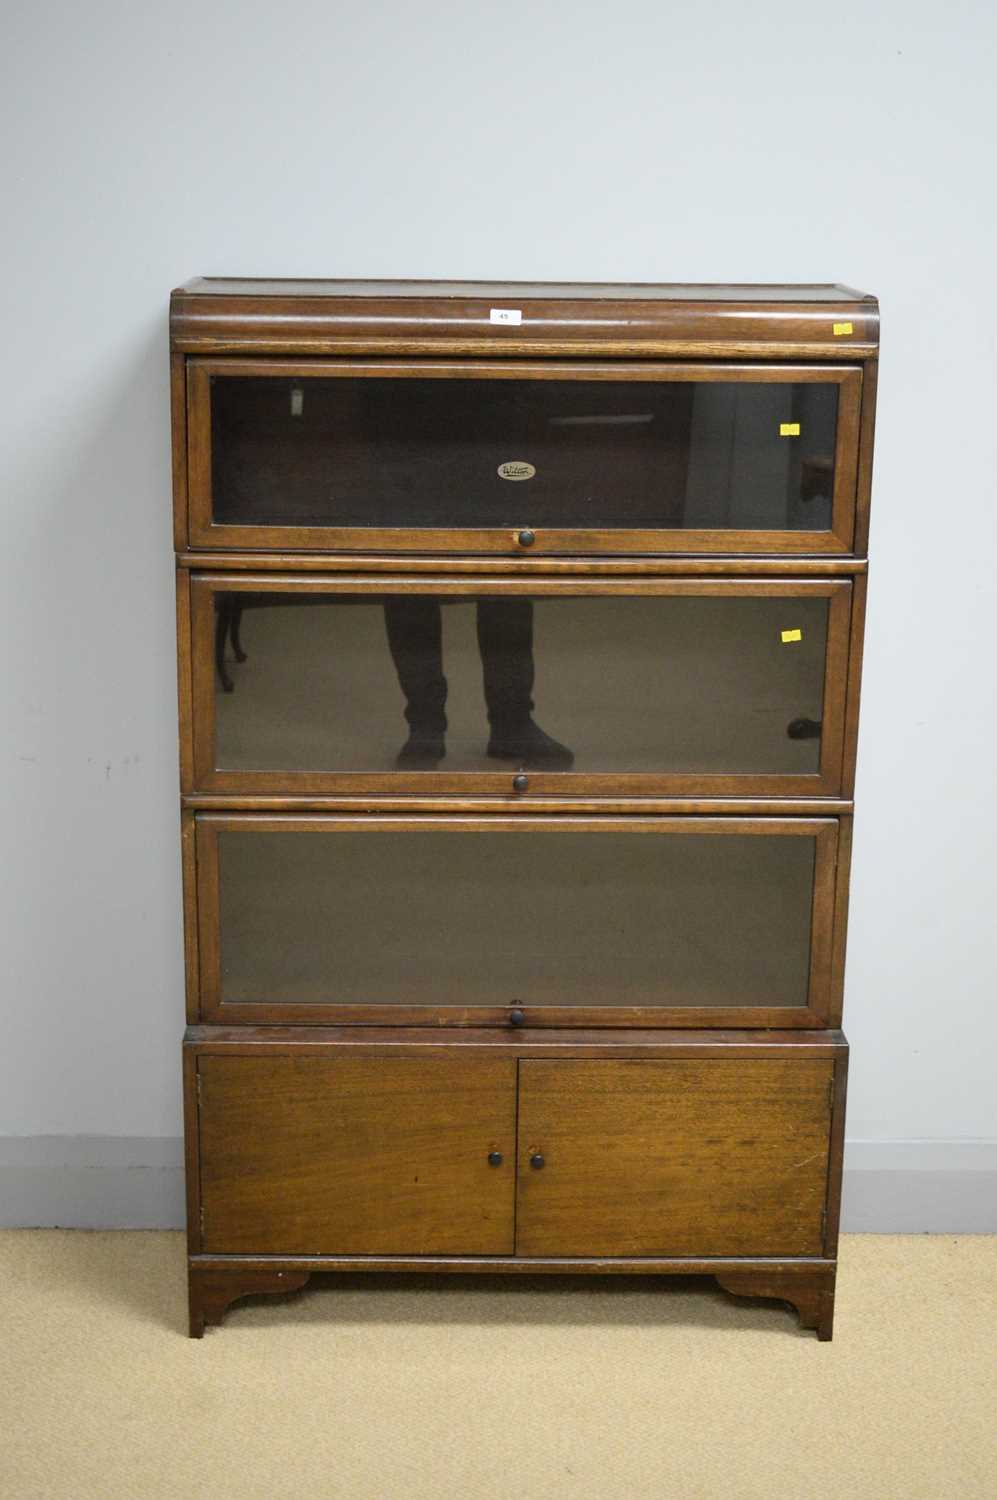 Wilton: an early 20th Century sectional bookcase.